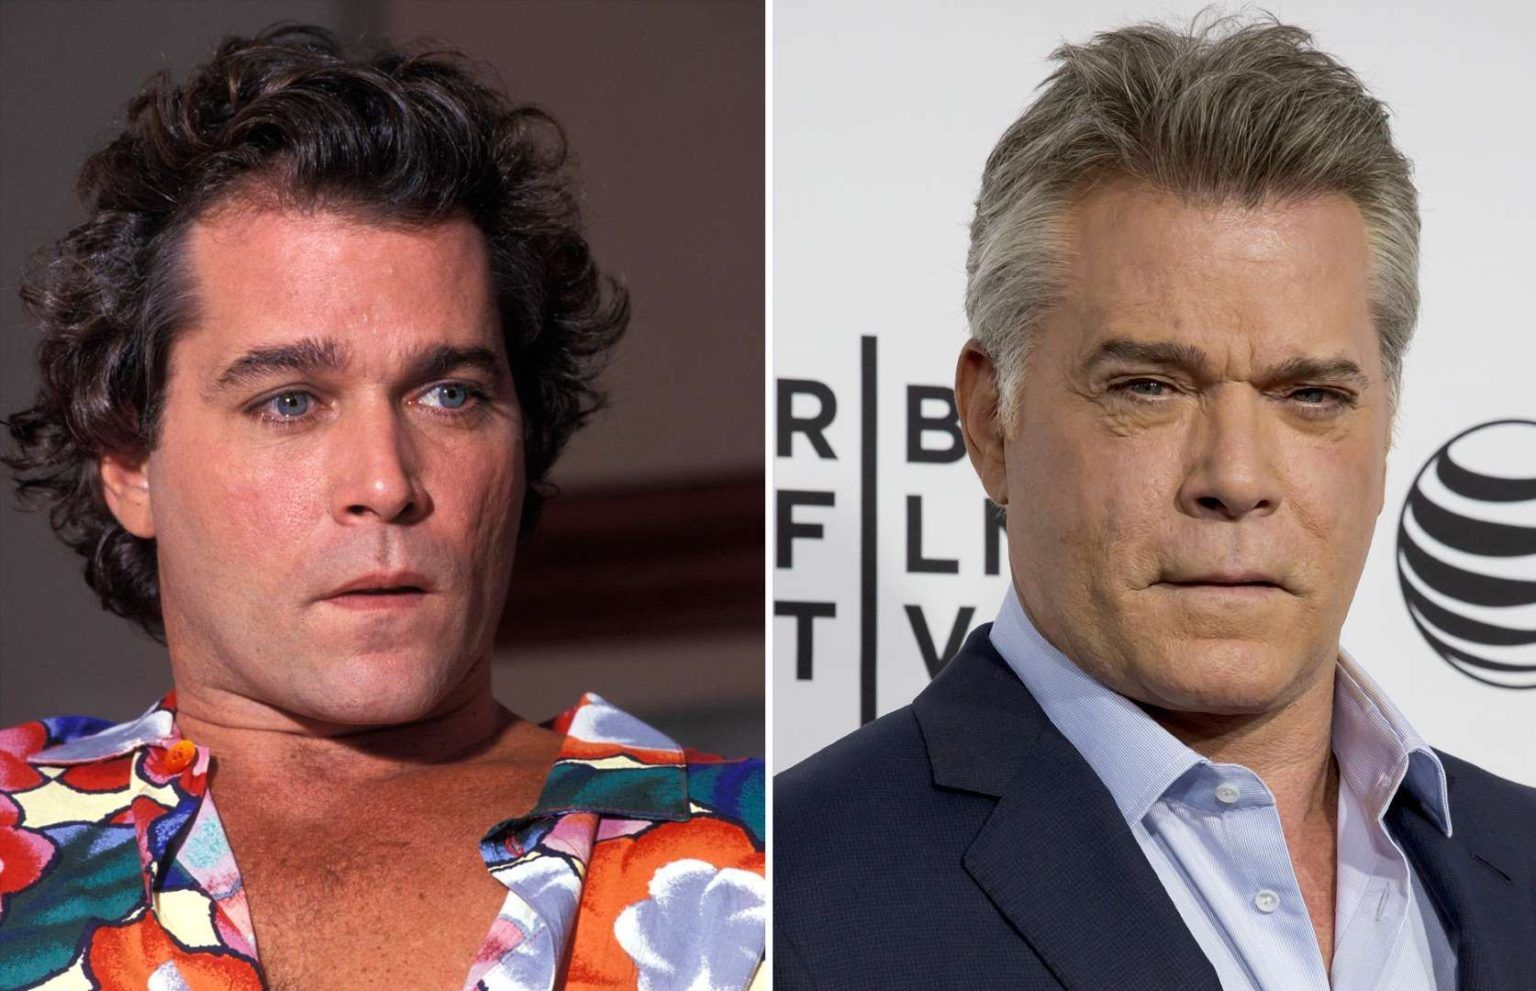 ray-liotta-before-after-1536x991.jpg